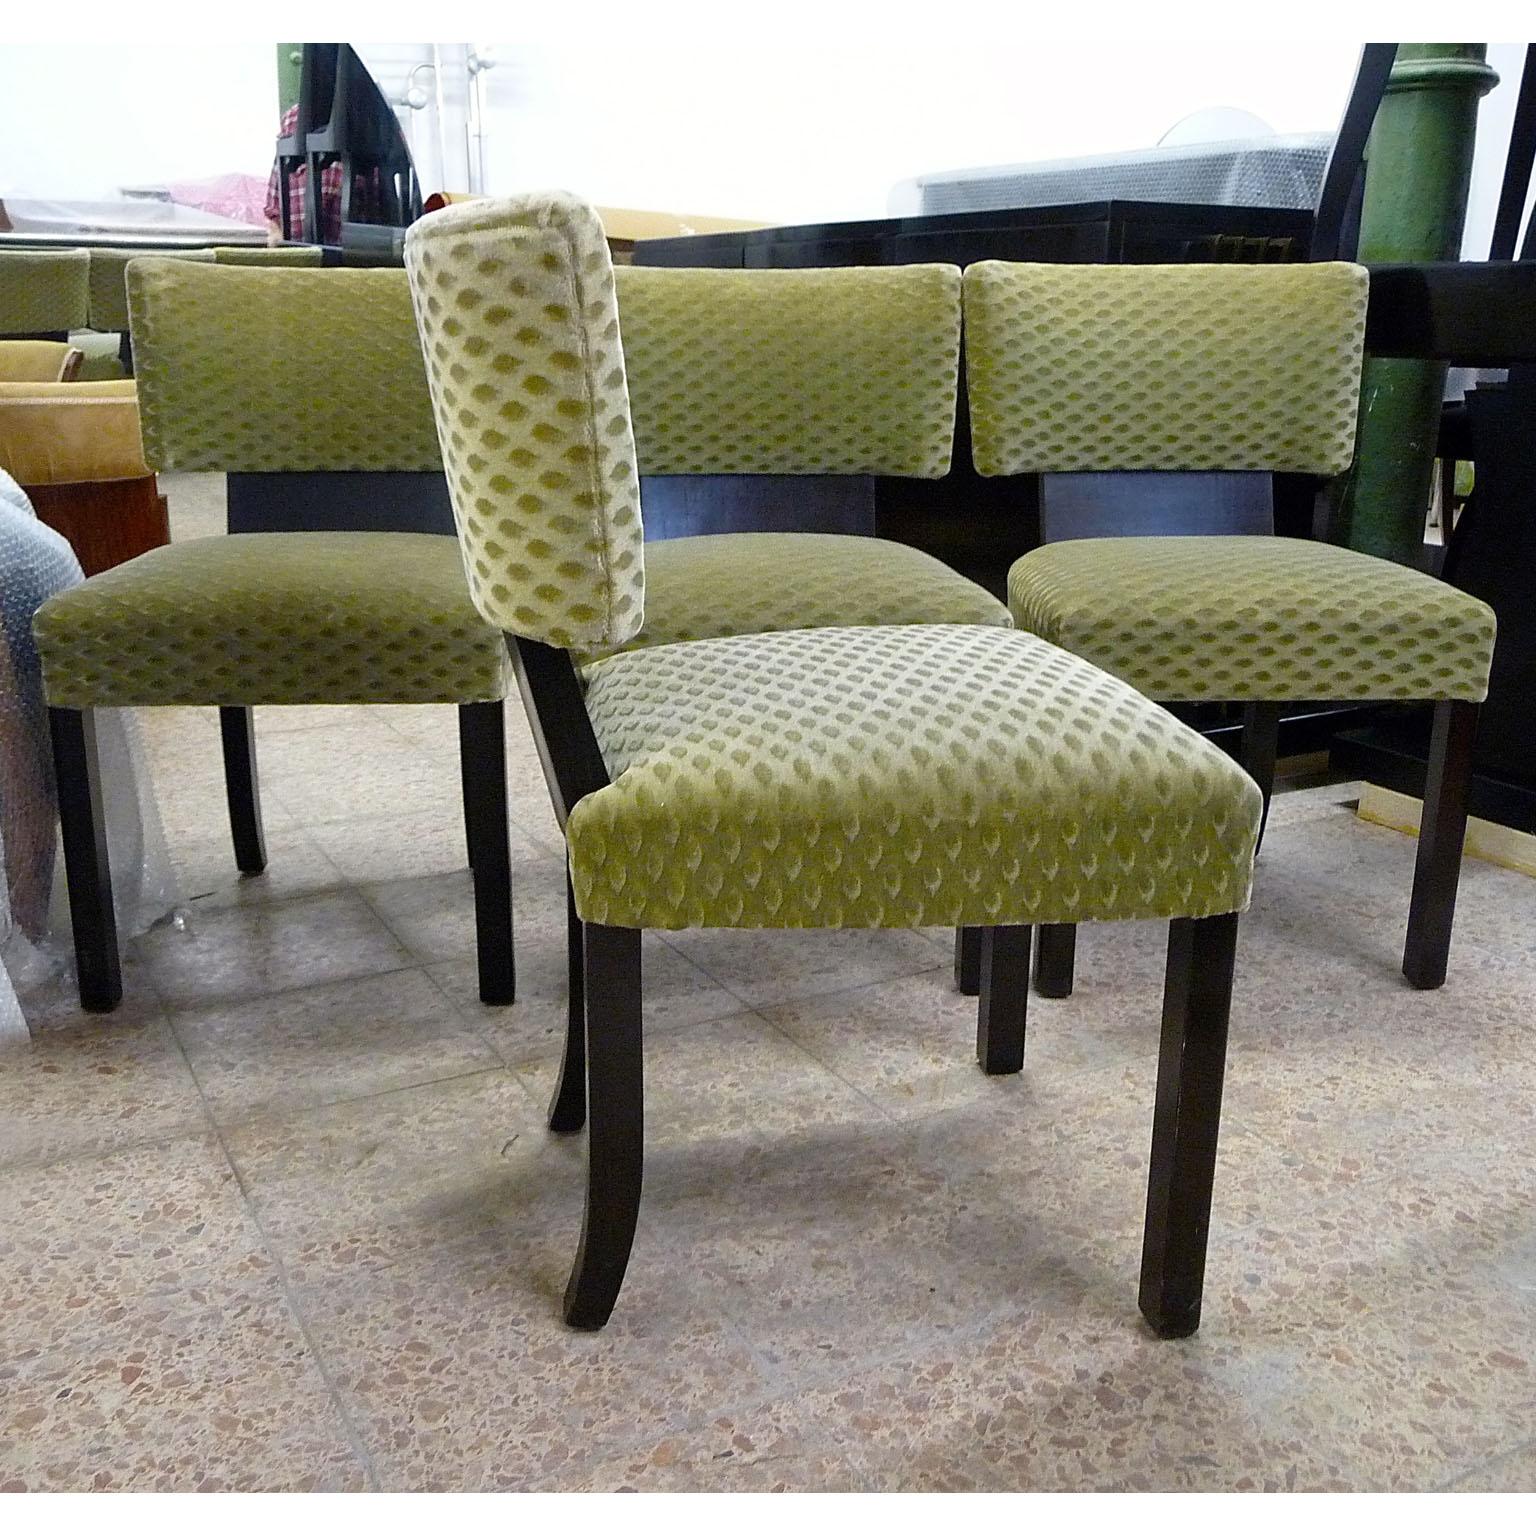 Art Deco Bauhaus Dining Chairs, Set of Four, Bruno Paul Design, Germany, 1930s 2